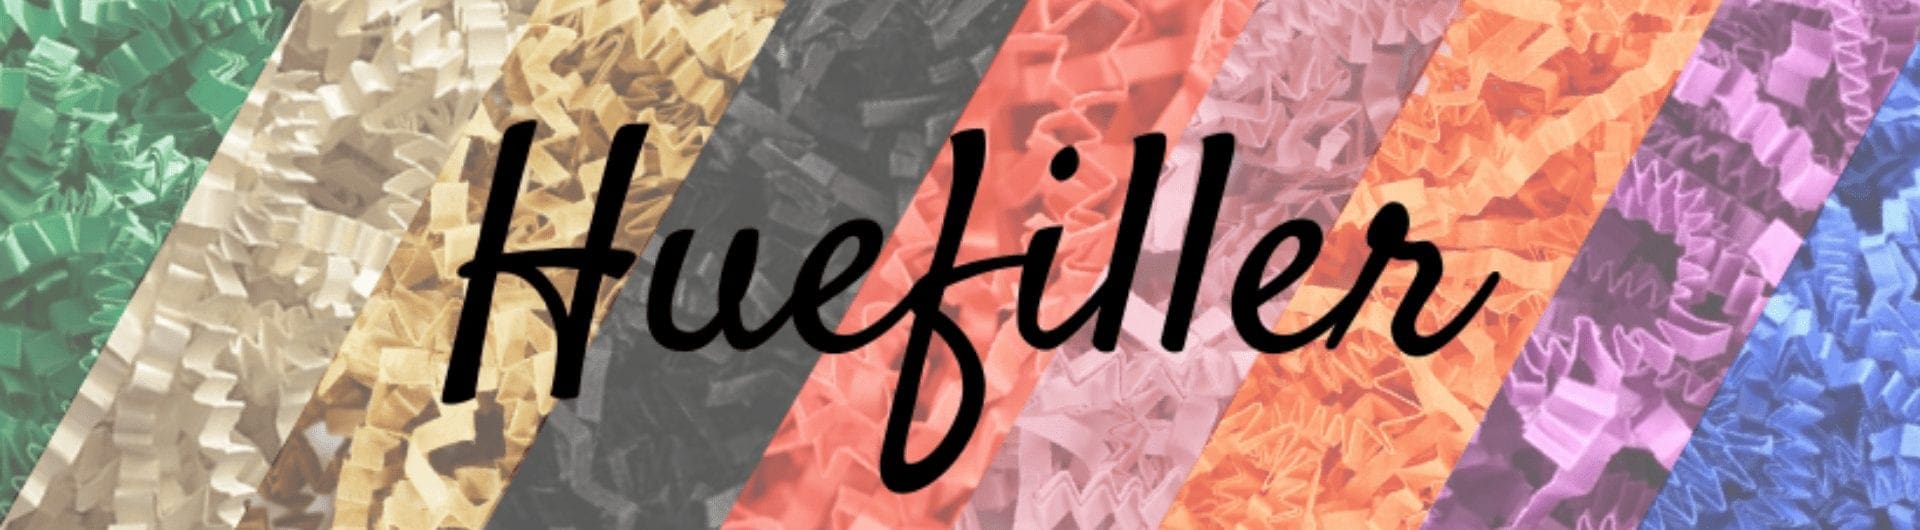 huefiller header image with different colors